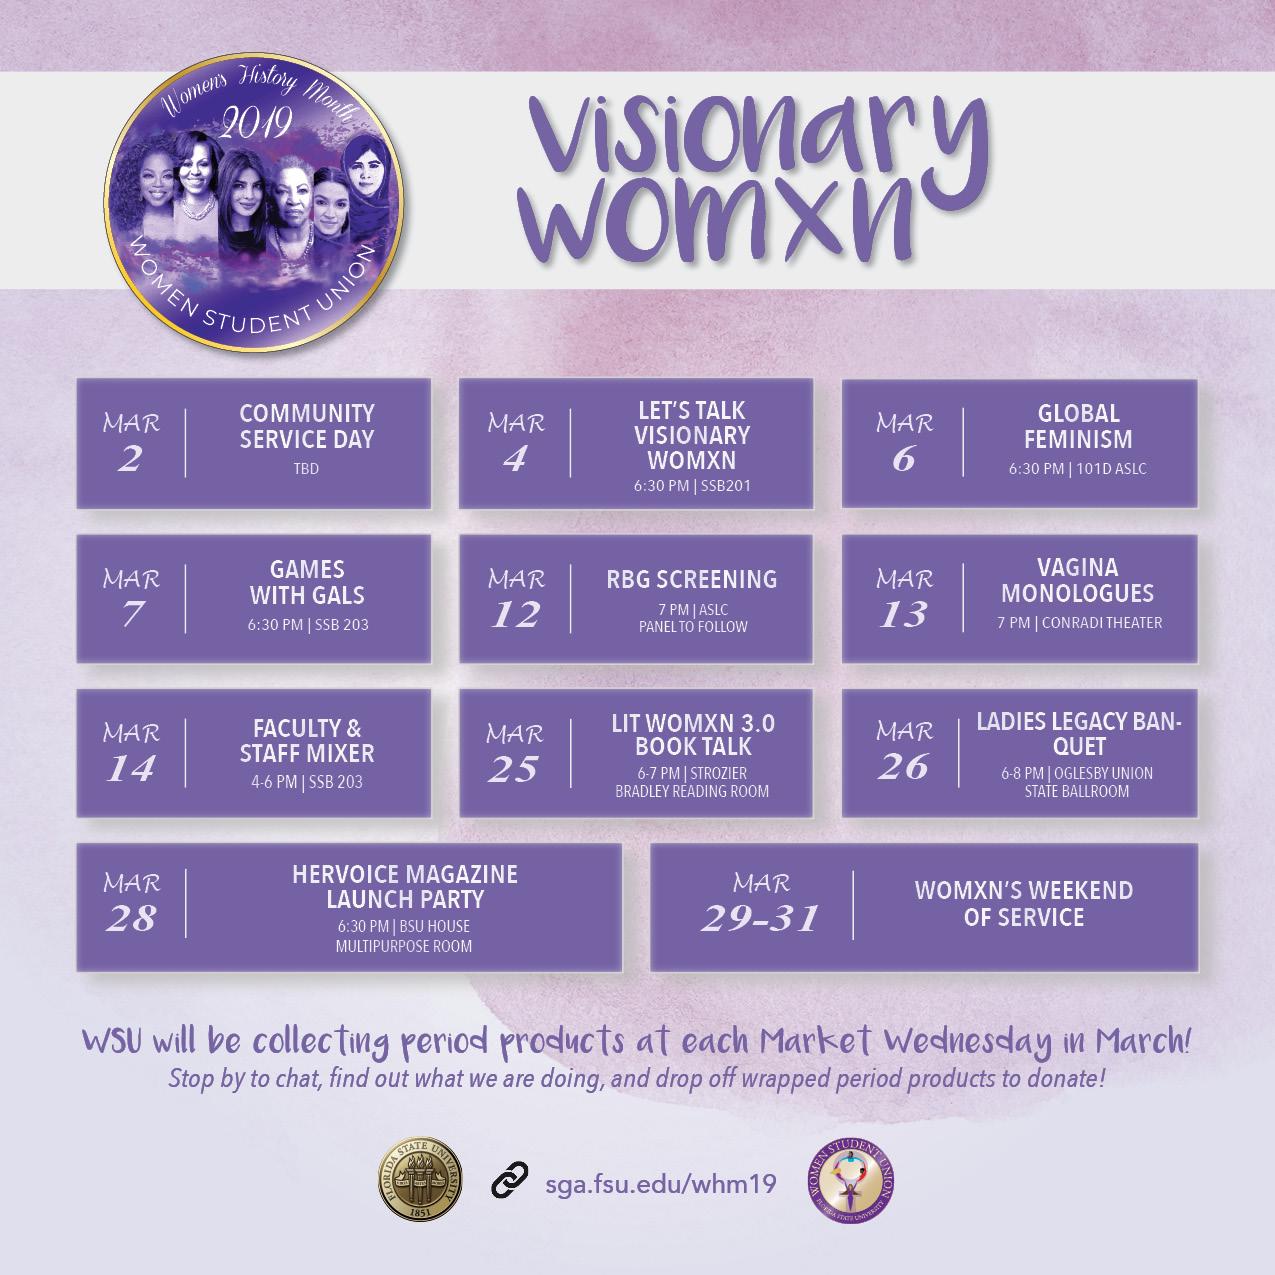 Women's History Month 2019: Visionary Womxn